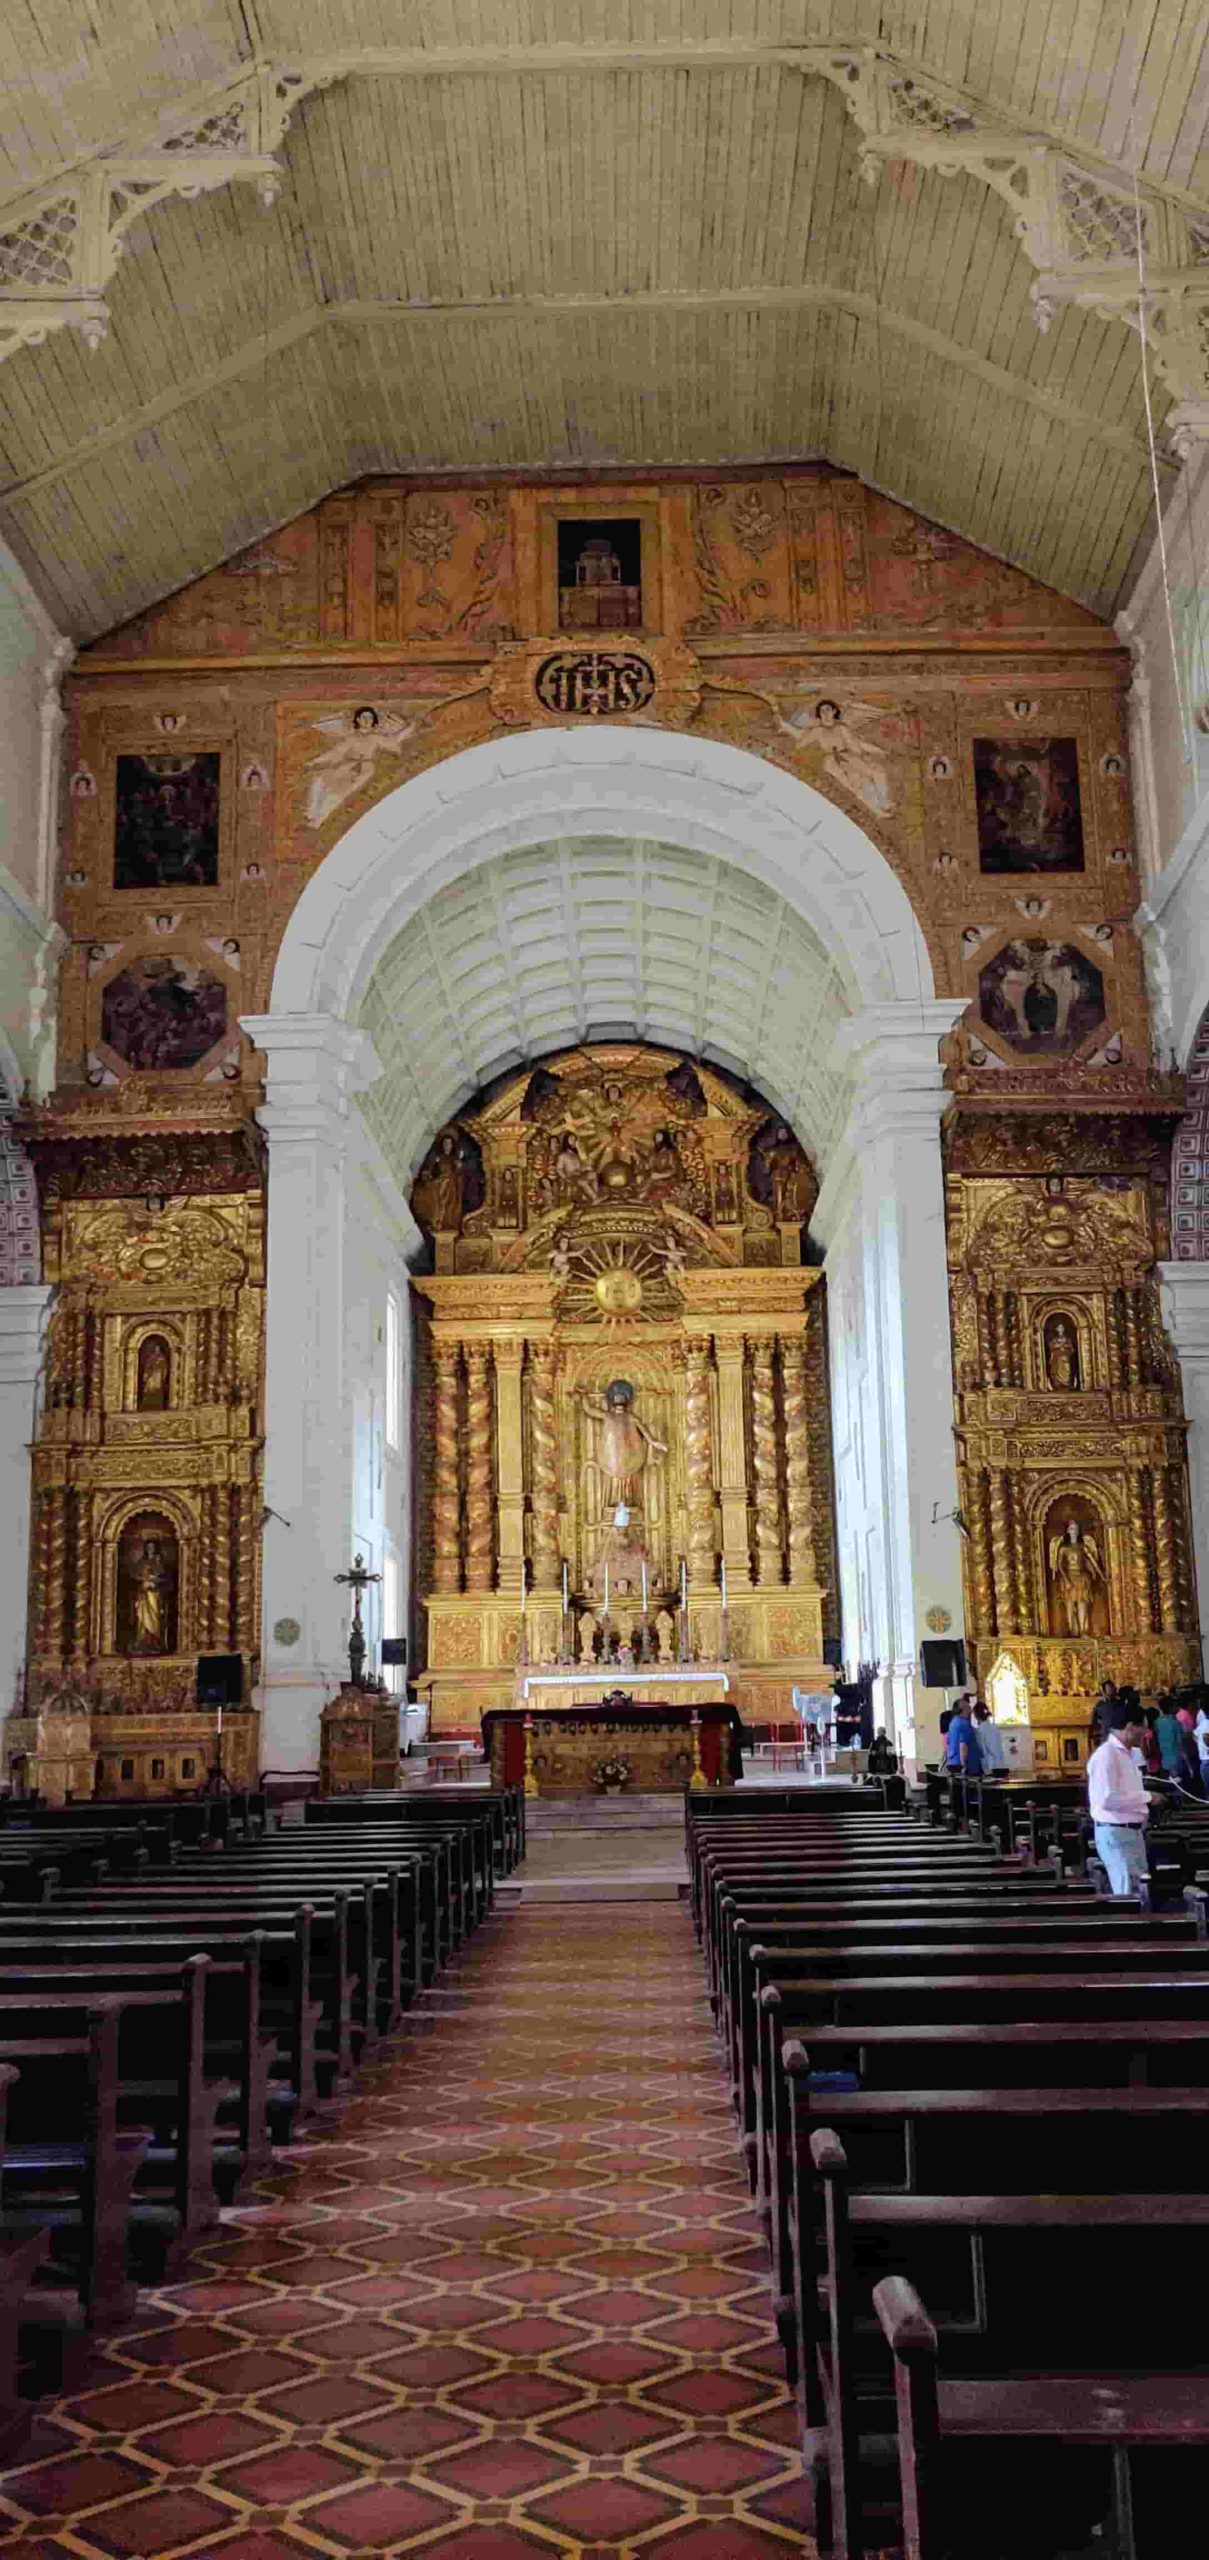 Things To Do In Goa in 2 Days Trip-Basilica of Bom Jesus Church